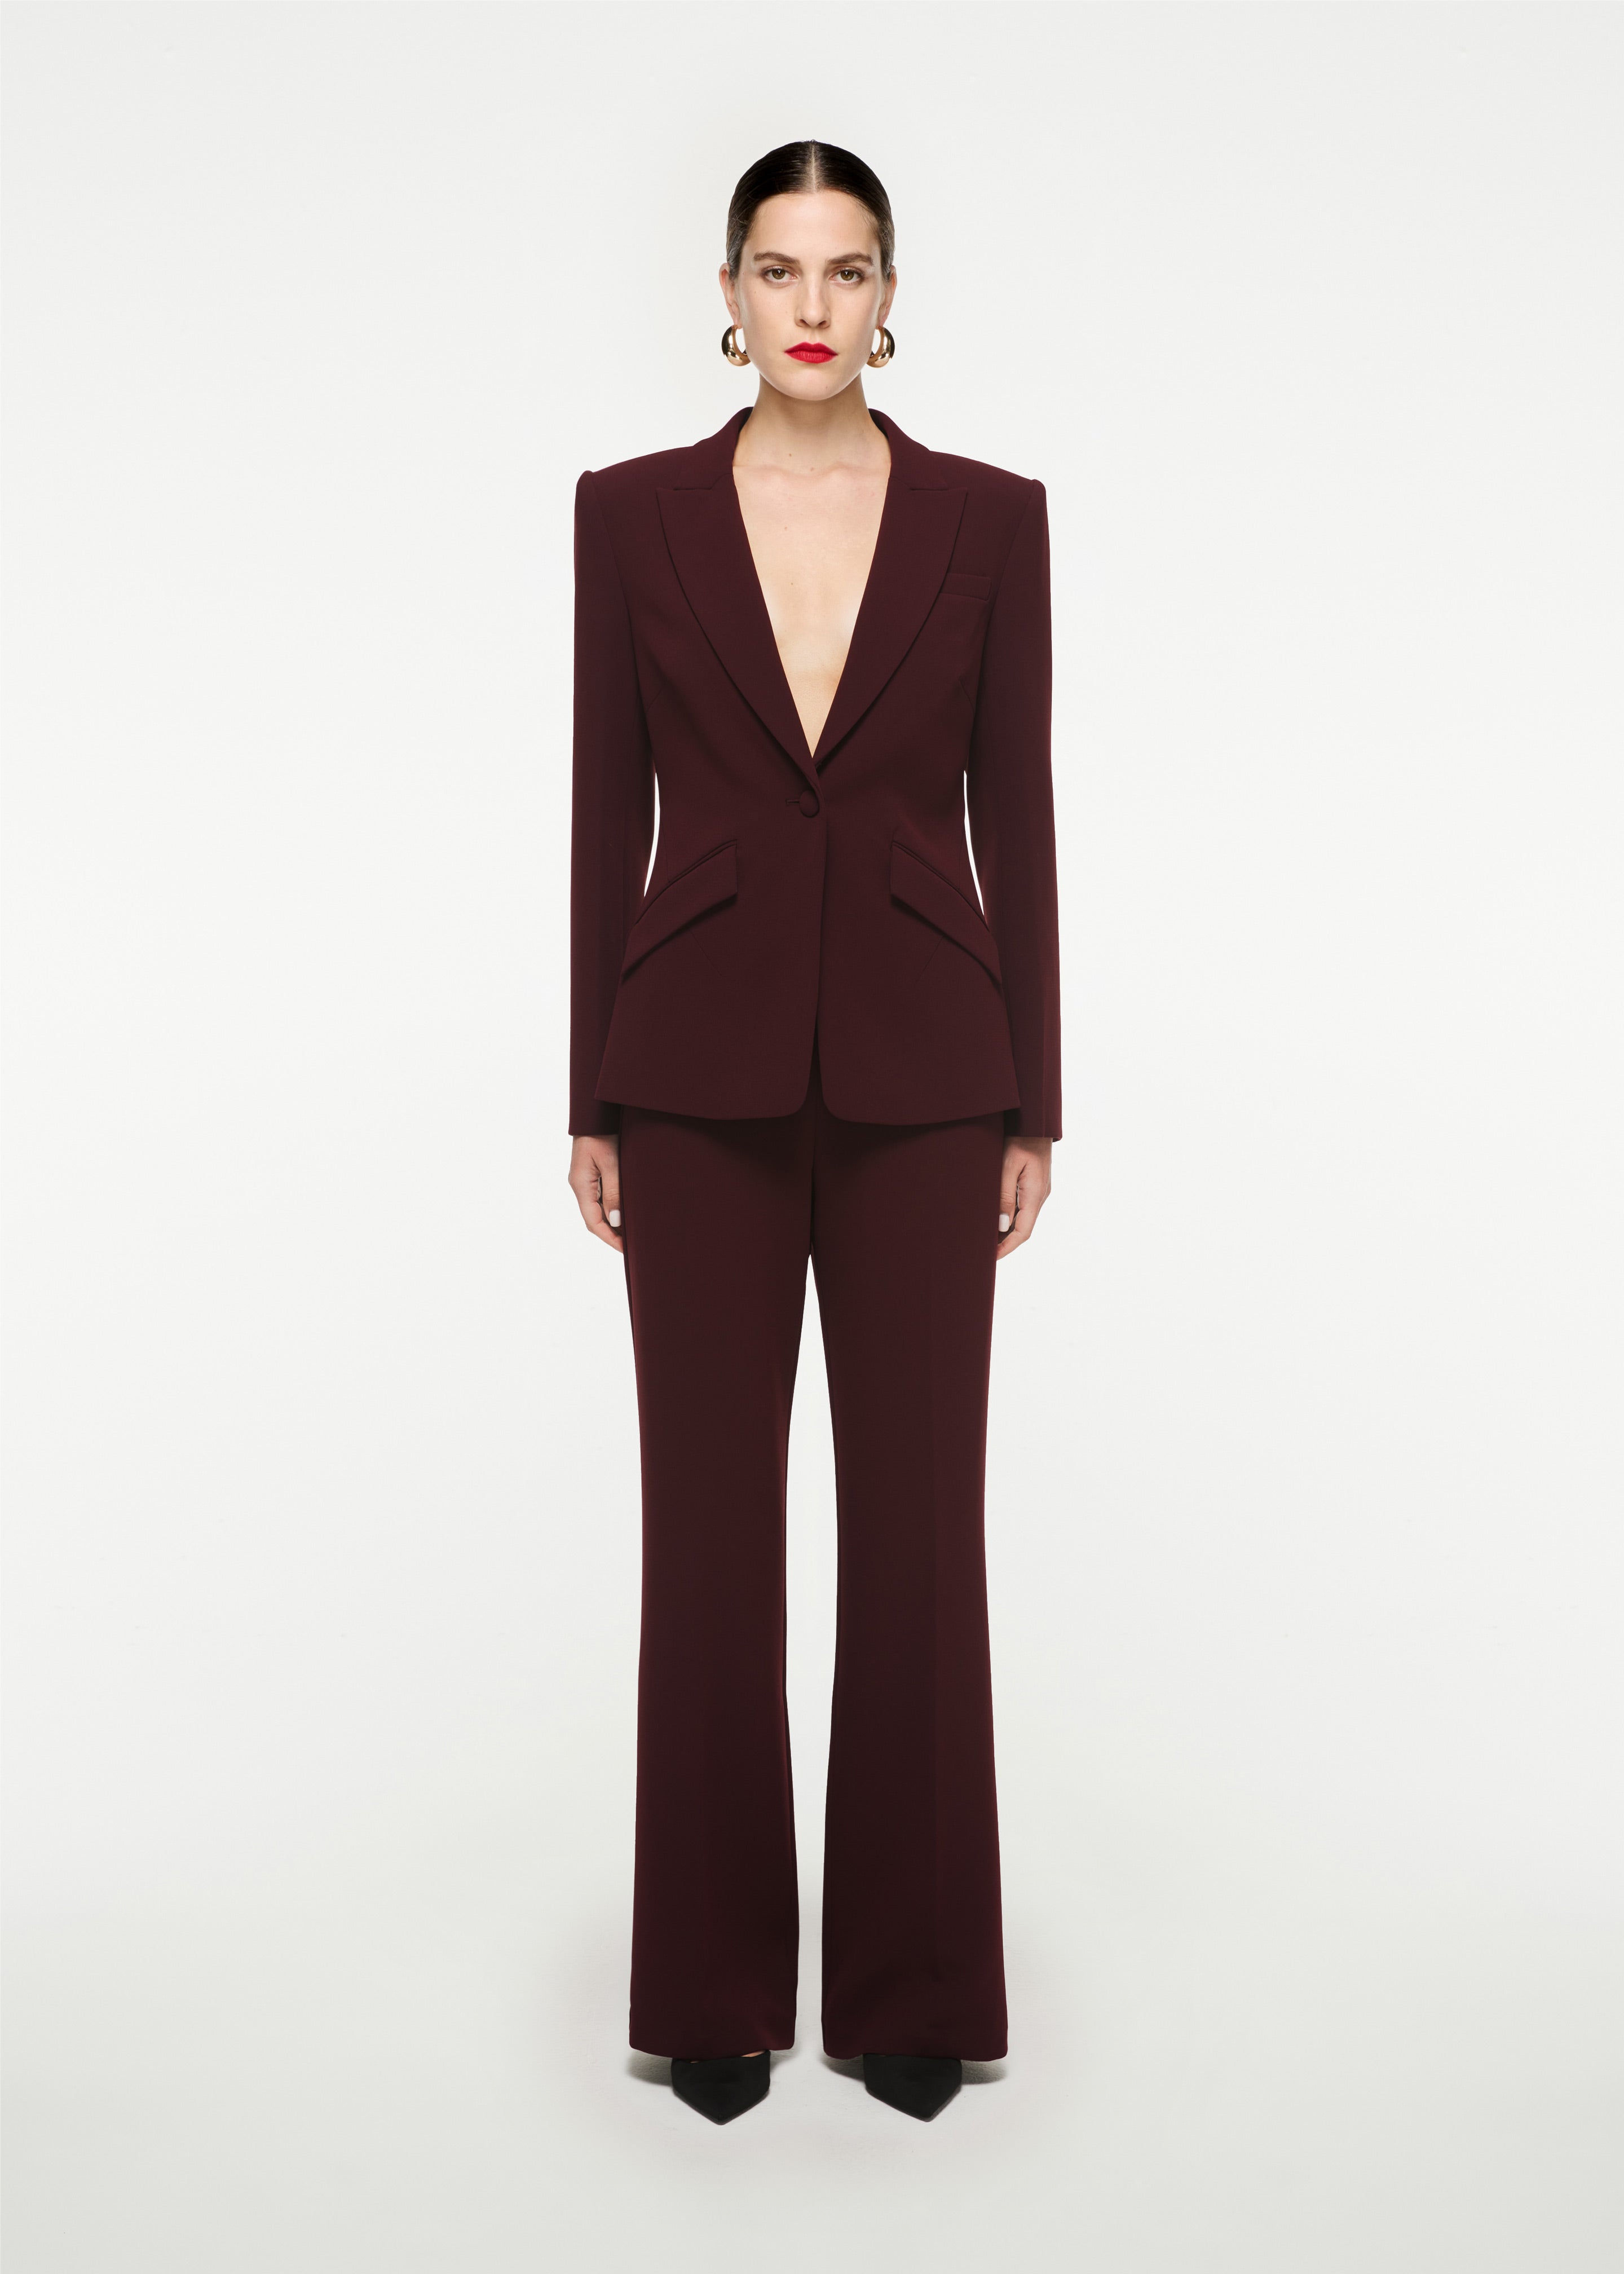 Women's Burgundy Dress Pants | Suits for Weddings & Events